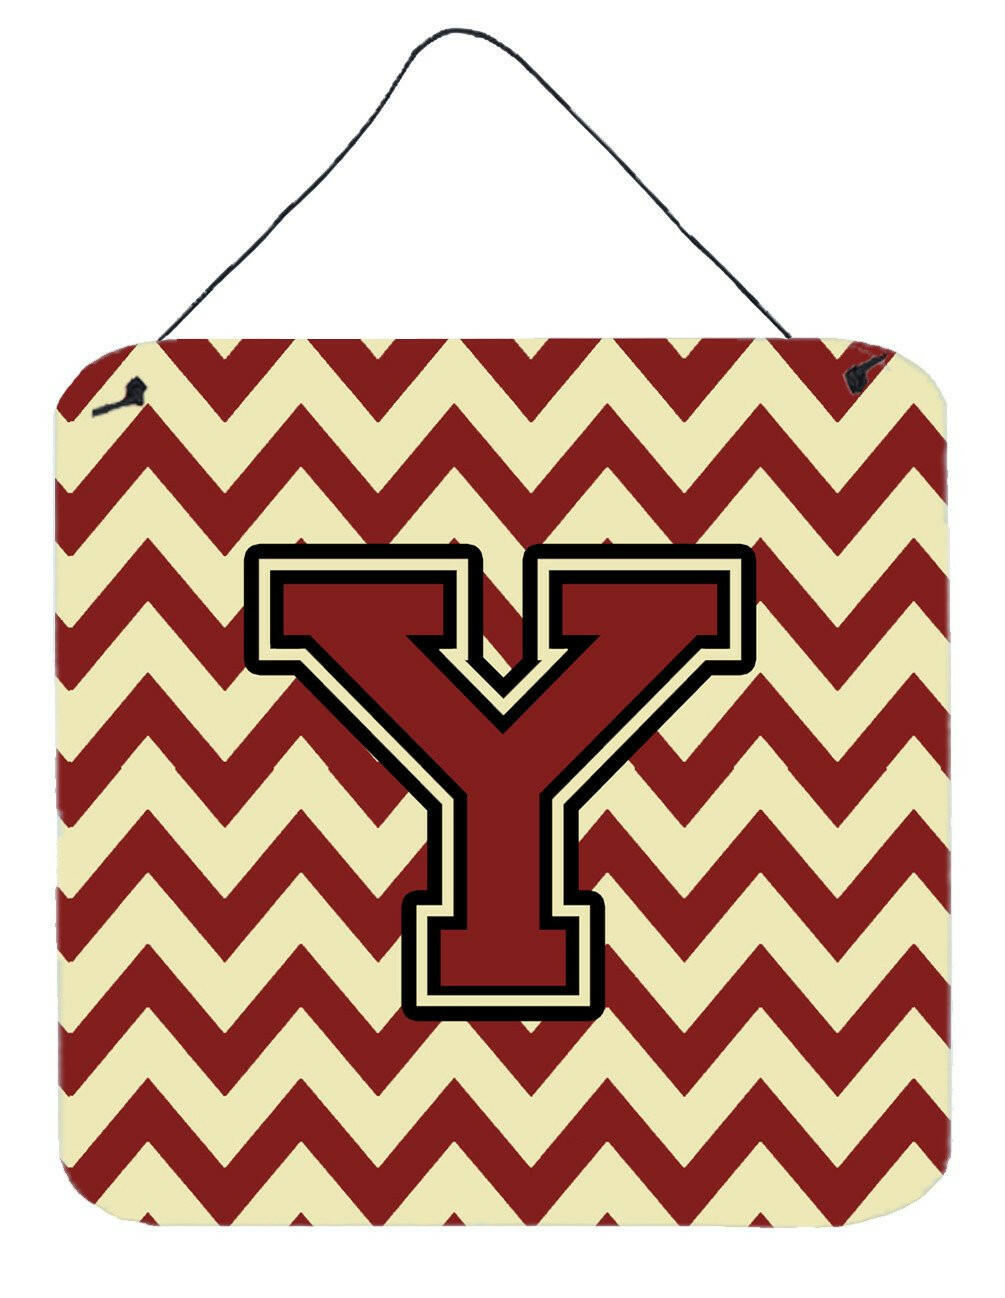 Letter Y Chevron Maroon and Gold Wall or Door Hanging Prints CJ1061-YDS66 by Caroline's Treasures